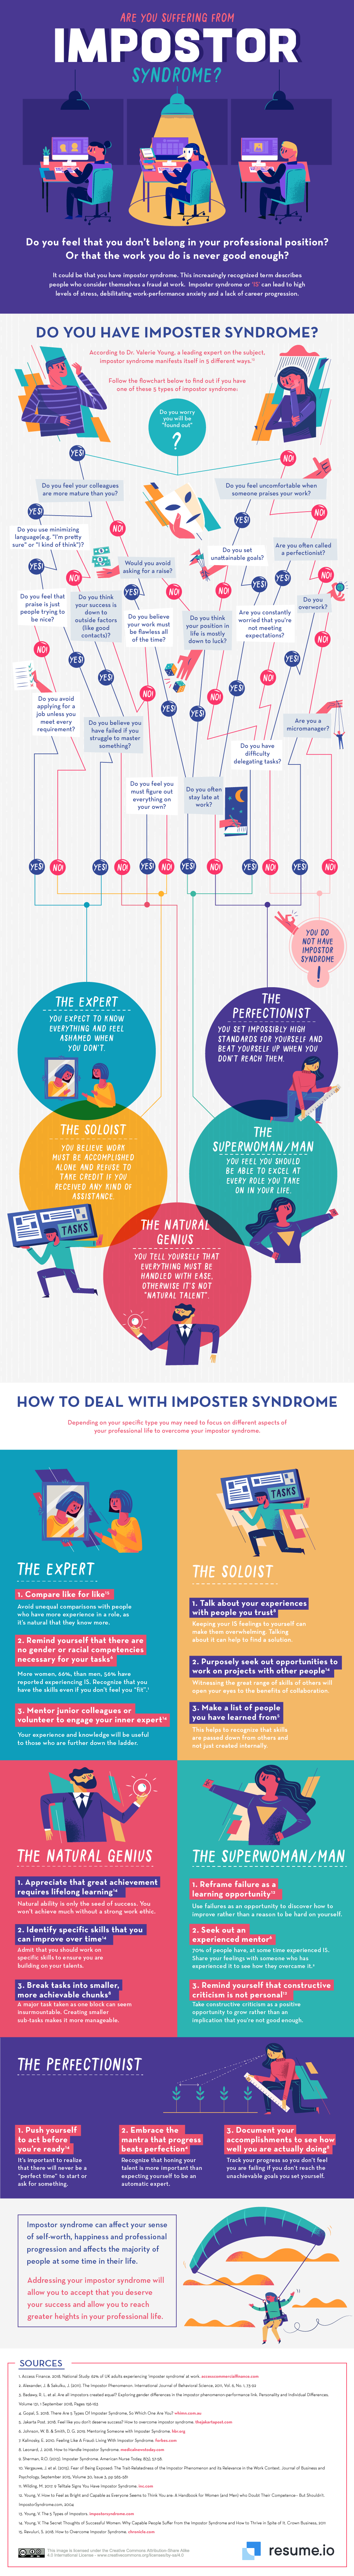 Are you suffering from impostor syndrome?